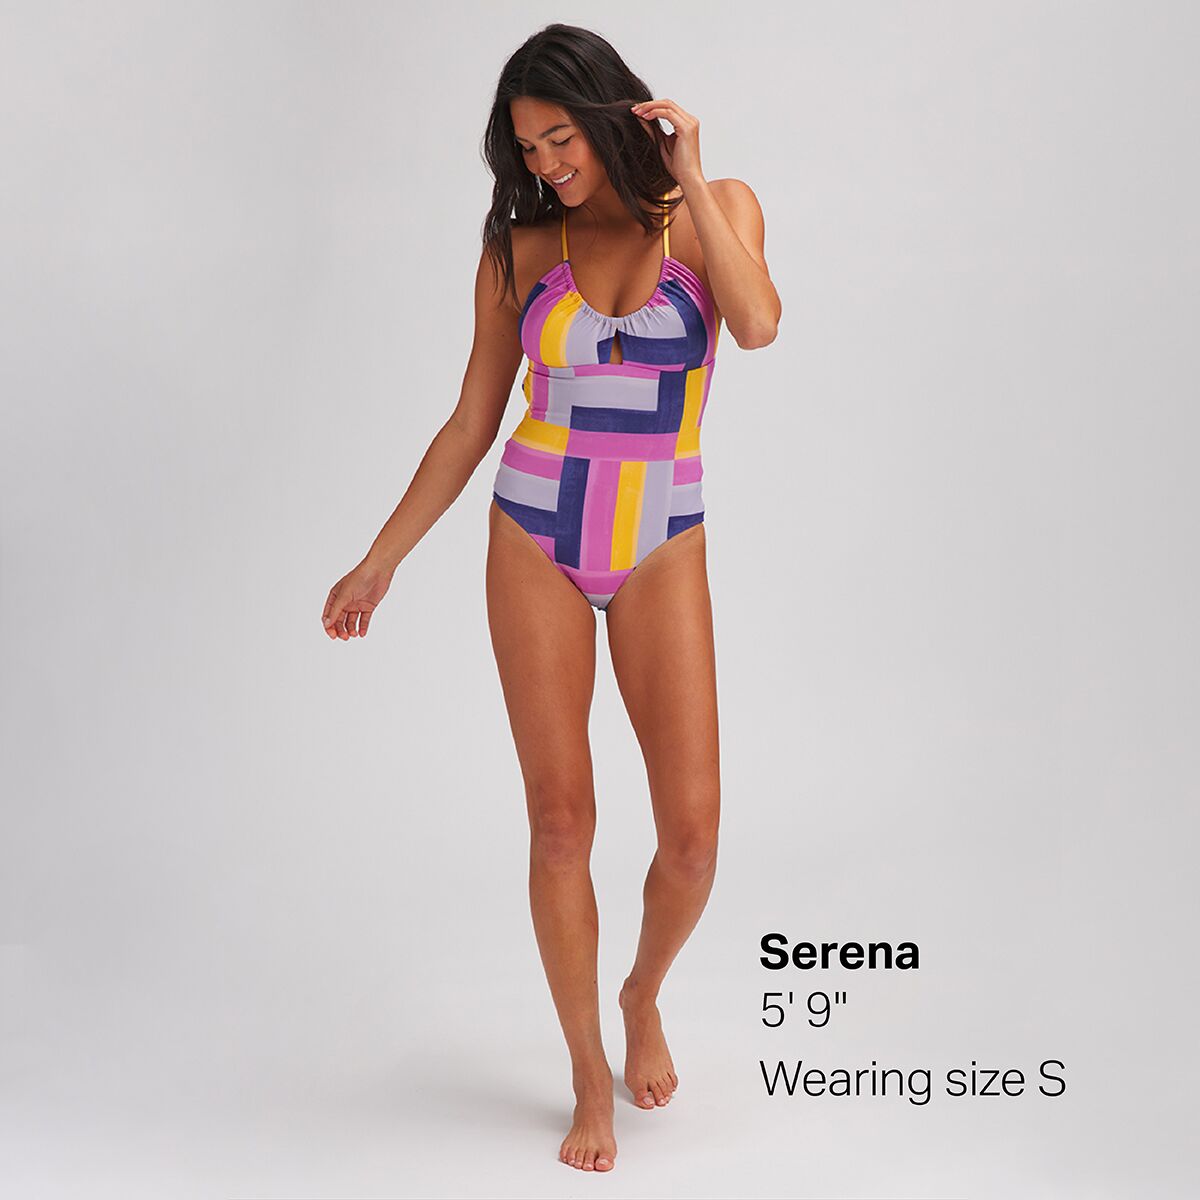 Women's One-Piece Swimsuits by Patagonia